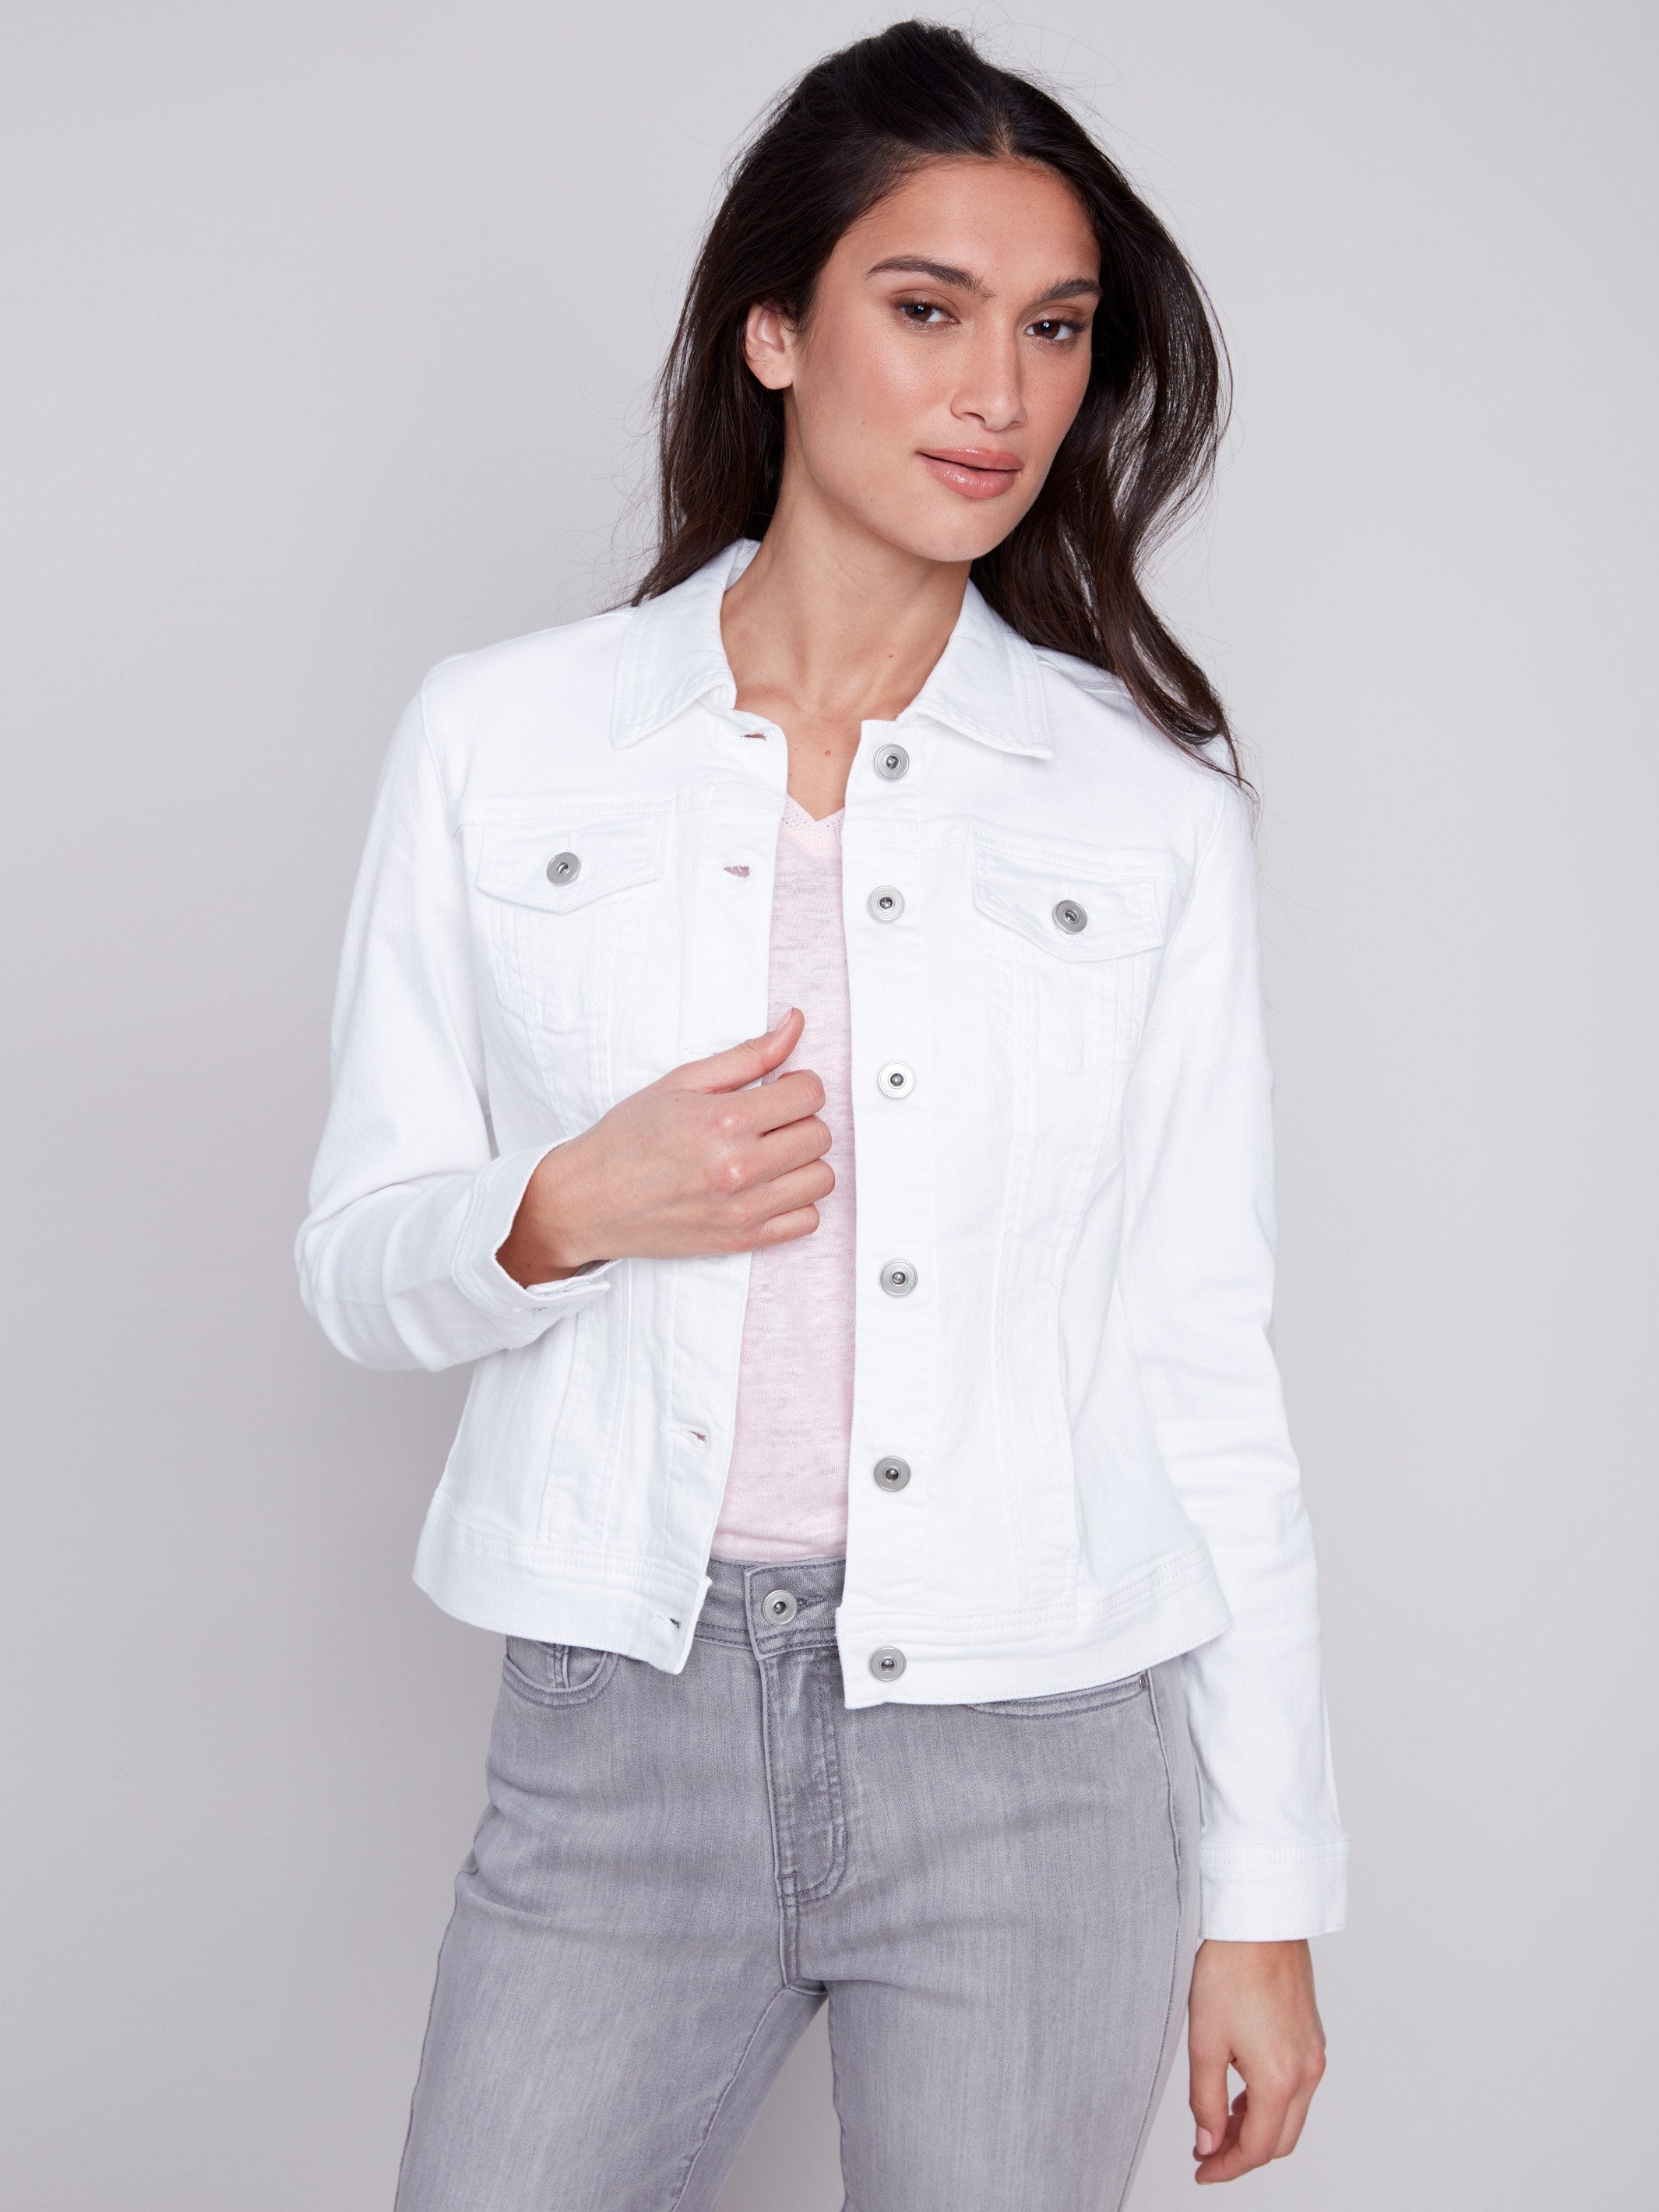 Stretch Denim Jacket - White - Charlie B Collection Canada - Image 1